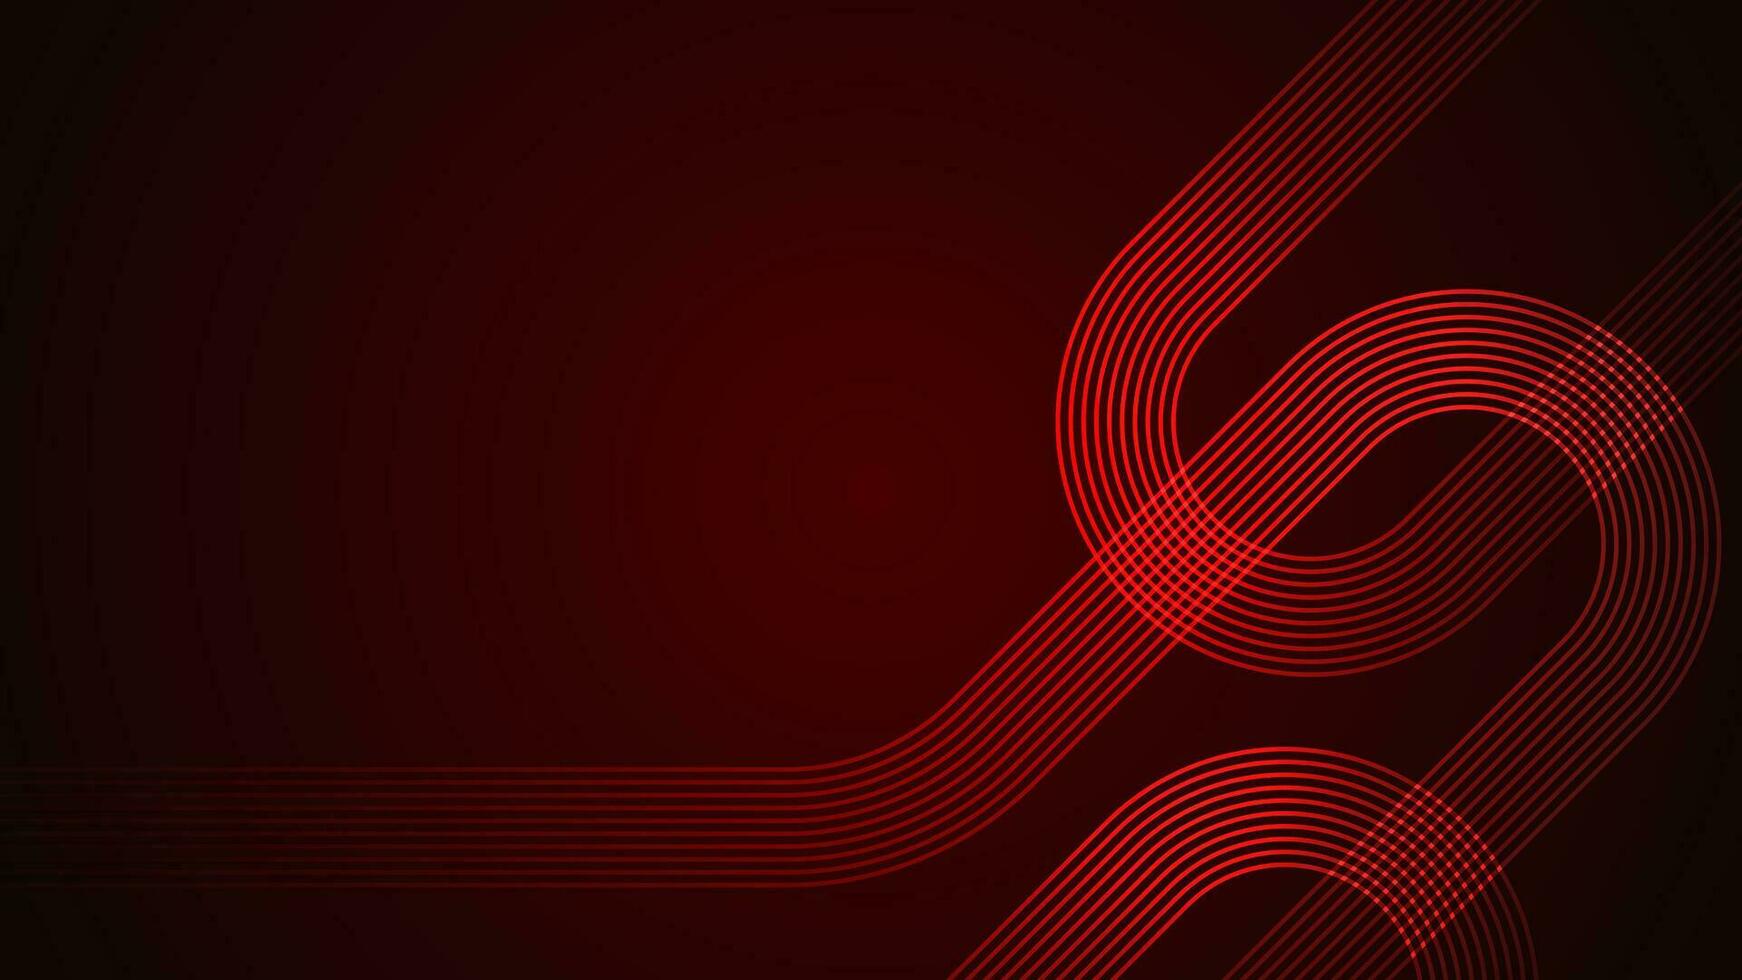 Dark red abstract background with serpentine style lines as the main component. vector